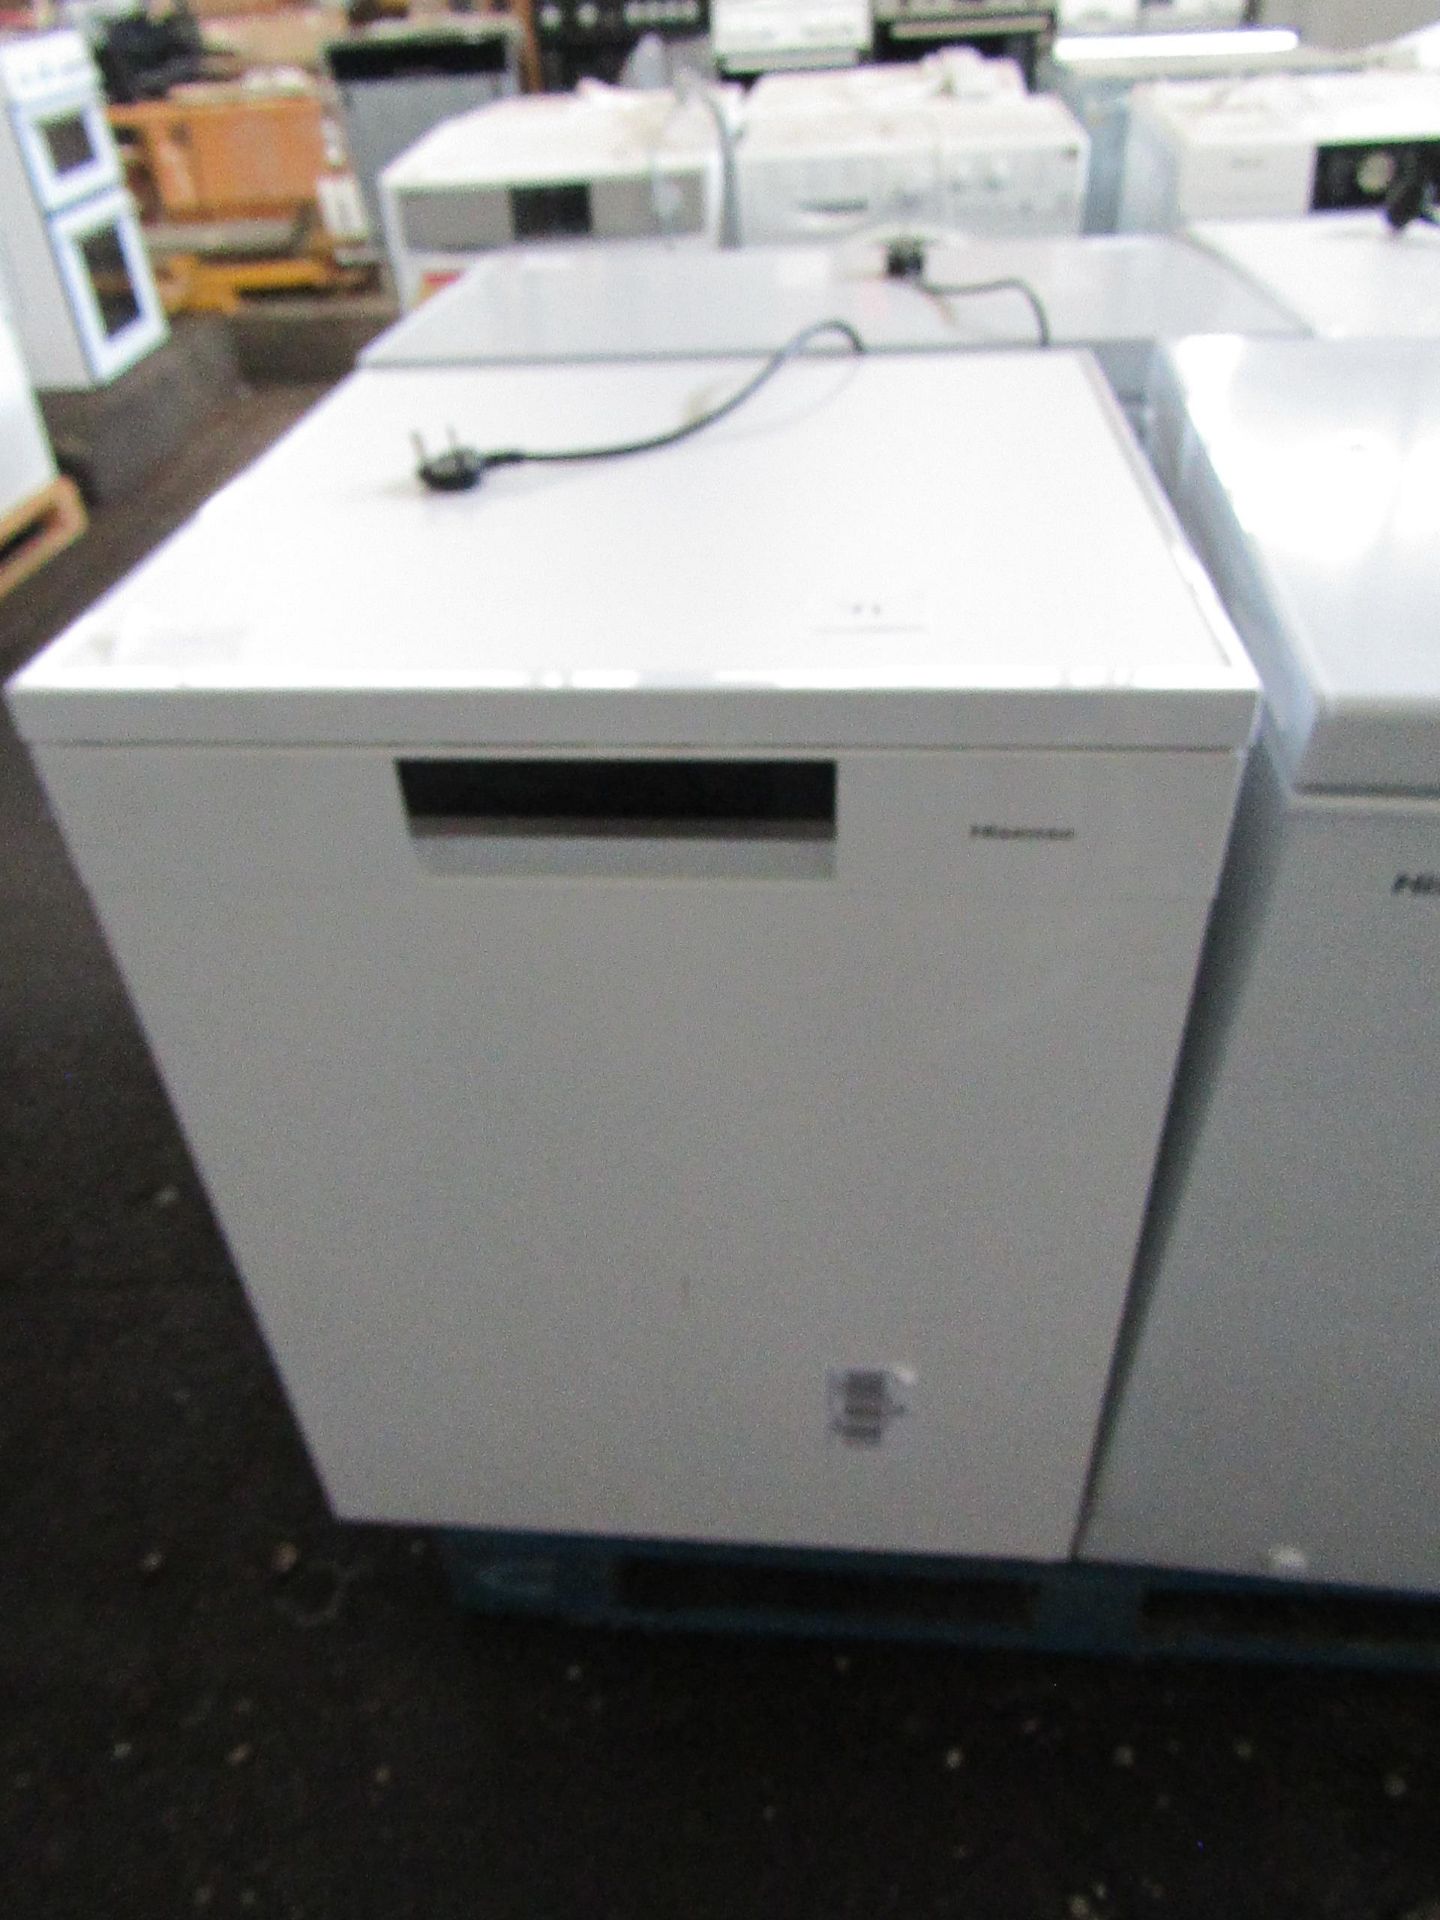 Hisense Dishwasher, Powers on and looks unused , has a scratch on the front nada dent onm the side